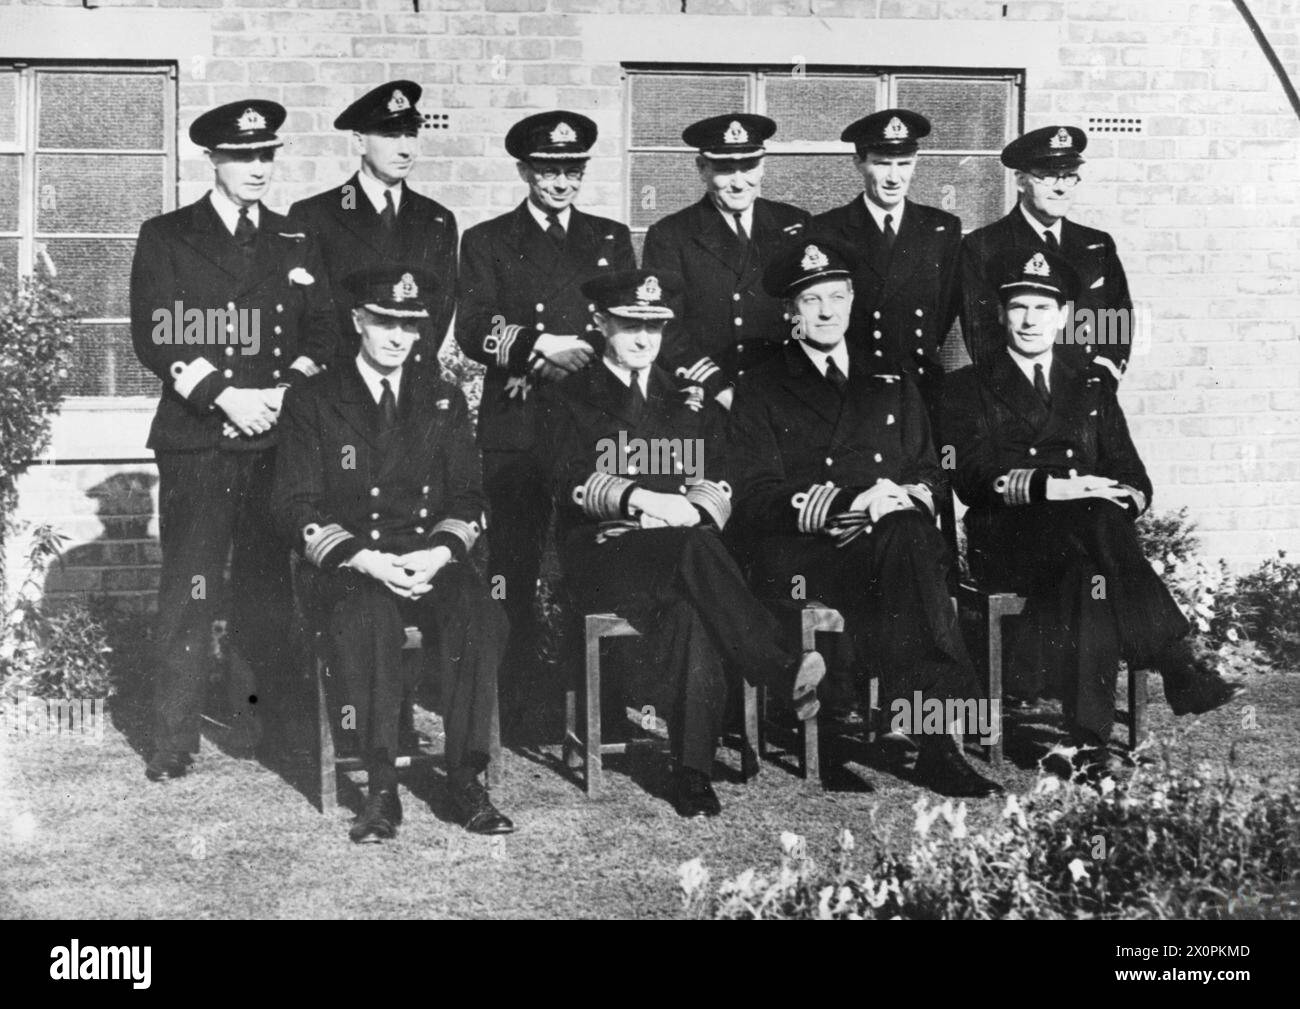 THE FIRST SEA LORD AT A FLEET AIR STATION. 18 OCTOBER 1944, HMS NIGHTJAR, ROYAL NAVAL AIR STATION INSKIP, PRESTON, LANCS. THE VISIT OF THE FIRST SEA LORD, ADMIRAL OF THE FLEET SIR ANDREW CUNNINGHAM. - Back row: Pay Commander H T Isaac, OBE, RN; Lieut Cdr J A Ivers, RN; Commander (A) Nicholson, RNVR; Commander F G Emley, RN; Lieut Cdr E B Morgan, RANVR; Pay Lieut J E Bryon, RNVR. Seated: Captain W T Couchman, OBE, DSO, RN; 1st Sea Lord; Captain J B Heath, RN; Captain G Thistleton-Smith, GM, RN Stock Photo